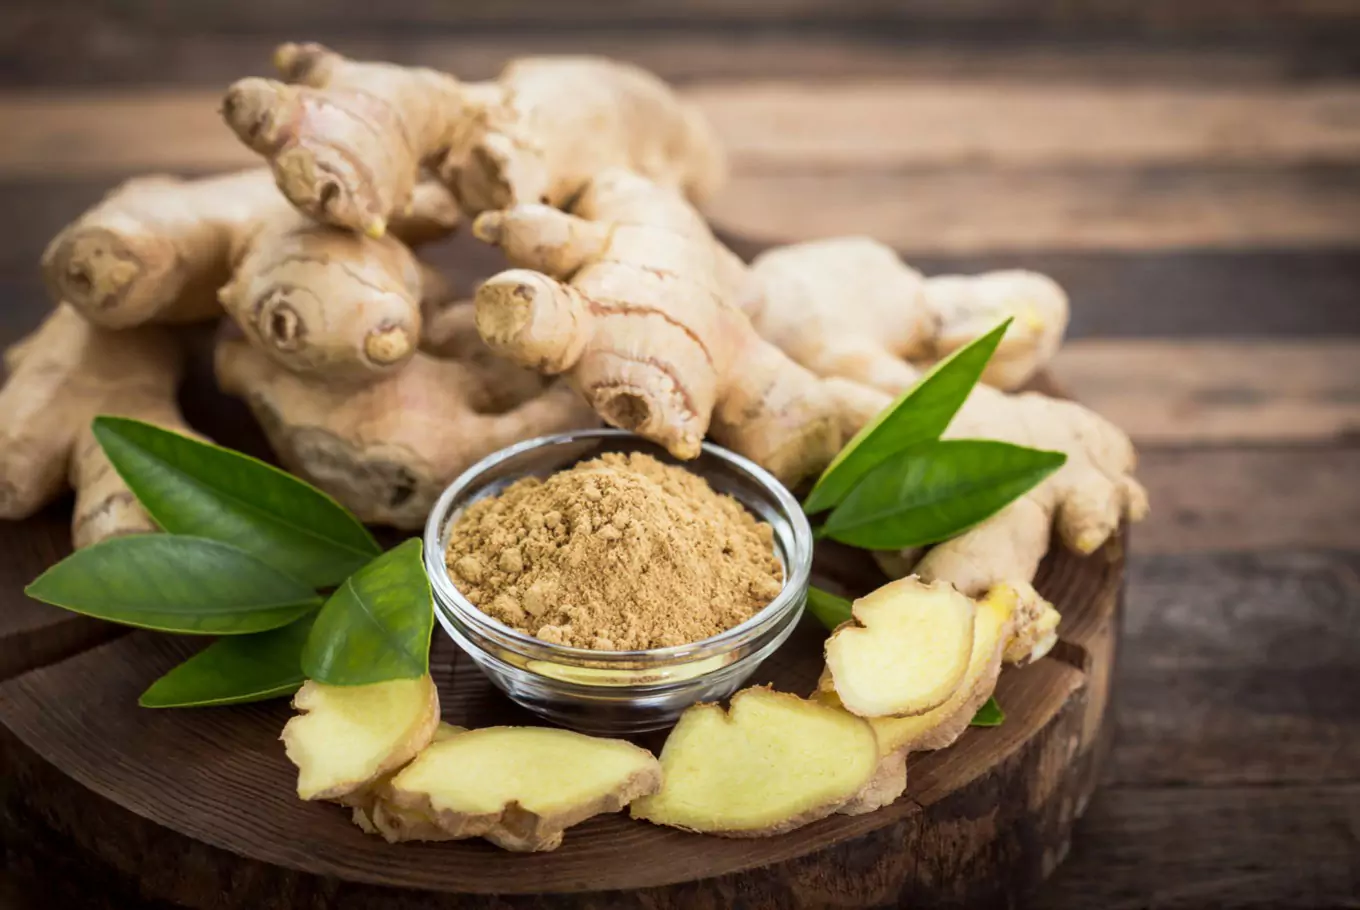 Can dogs eat ginger? The benefits of ginger for dogs